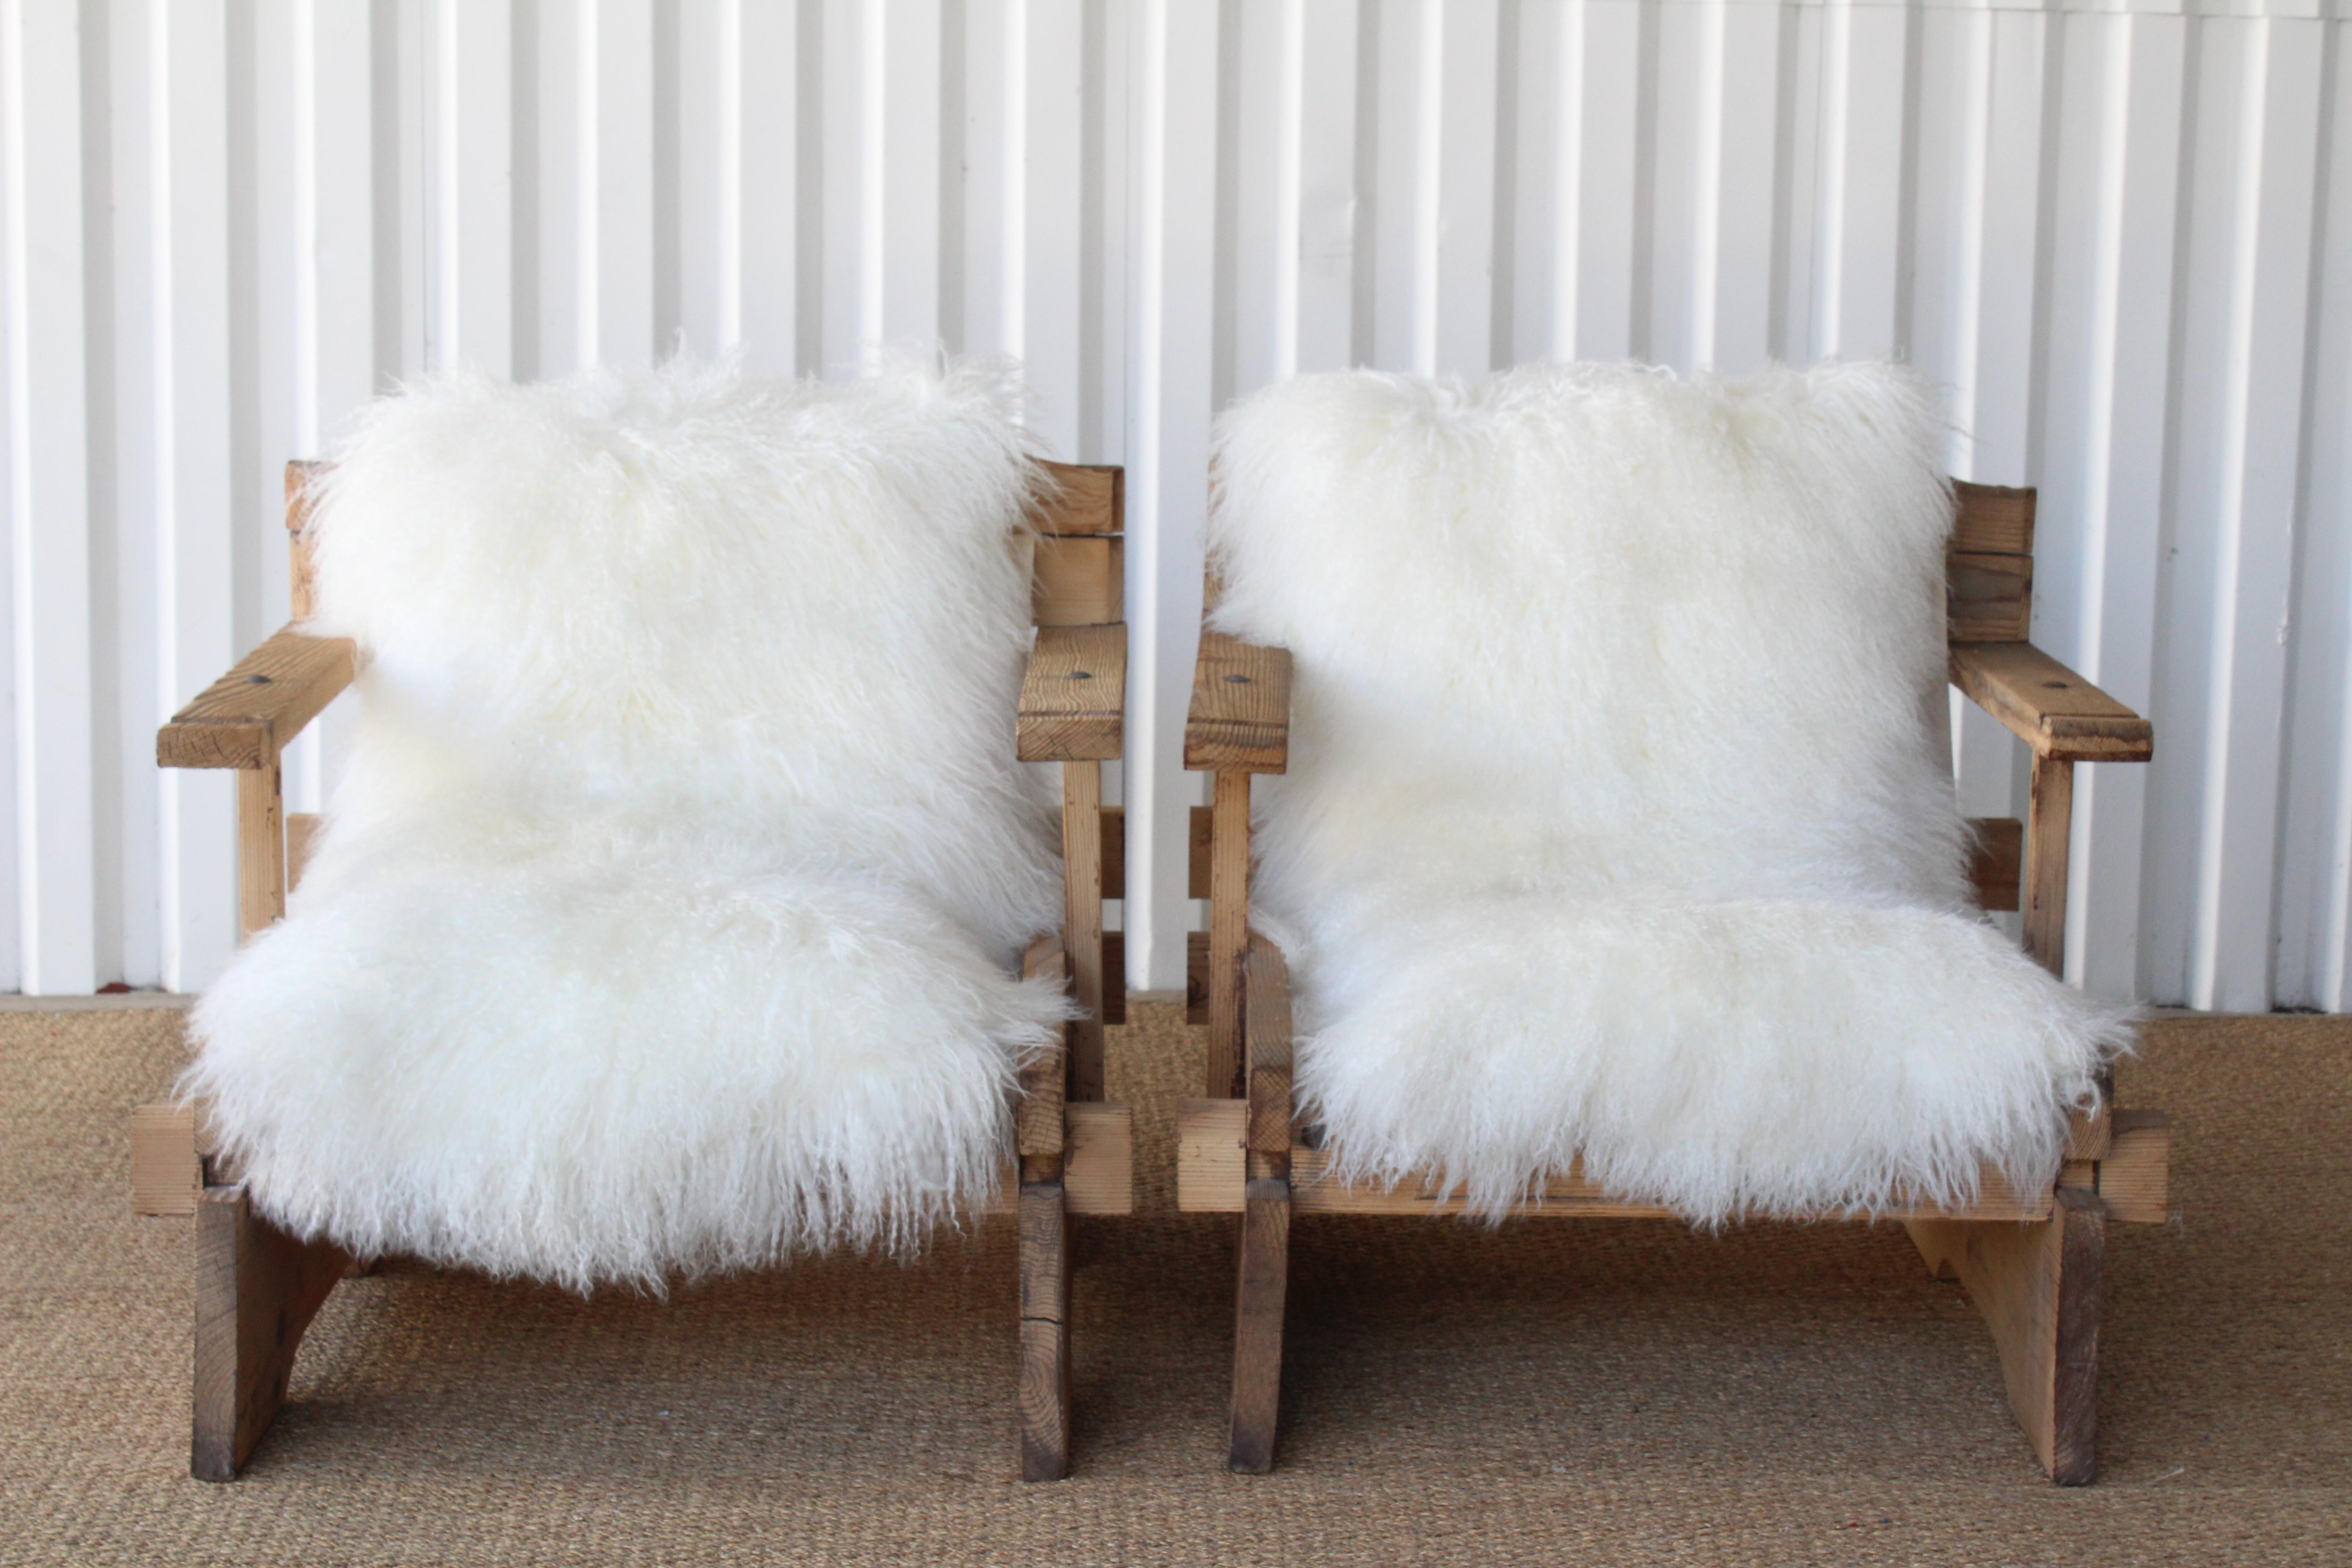 Pair of vintage one of a kind custom lounge chairs made of solid pine. From California, circa 1970s. Newly upholstered in long hair Mongolian lamb shearling hides and new canvas slings. The pine wood frames have been stripped and sand blasted and